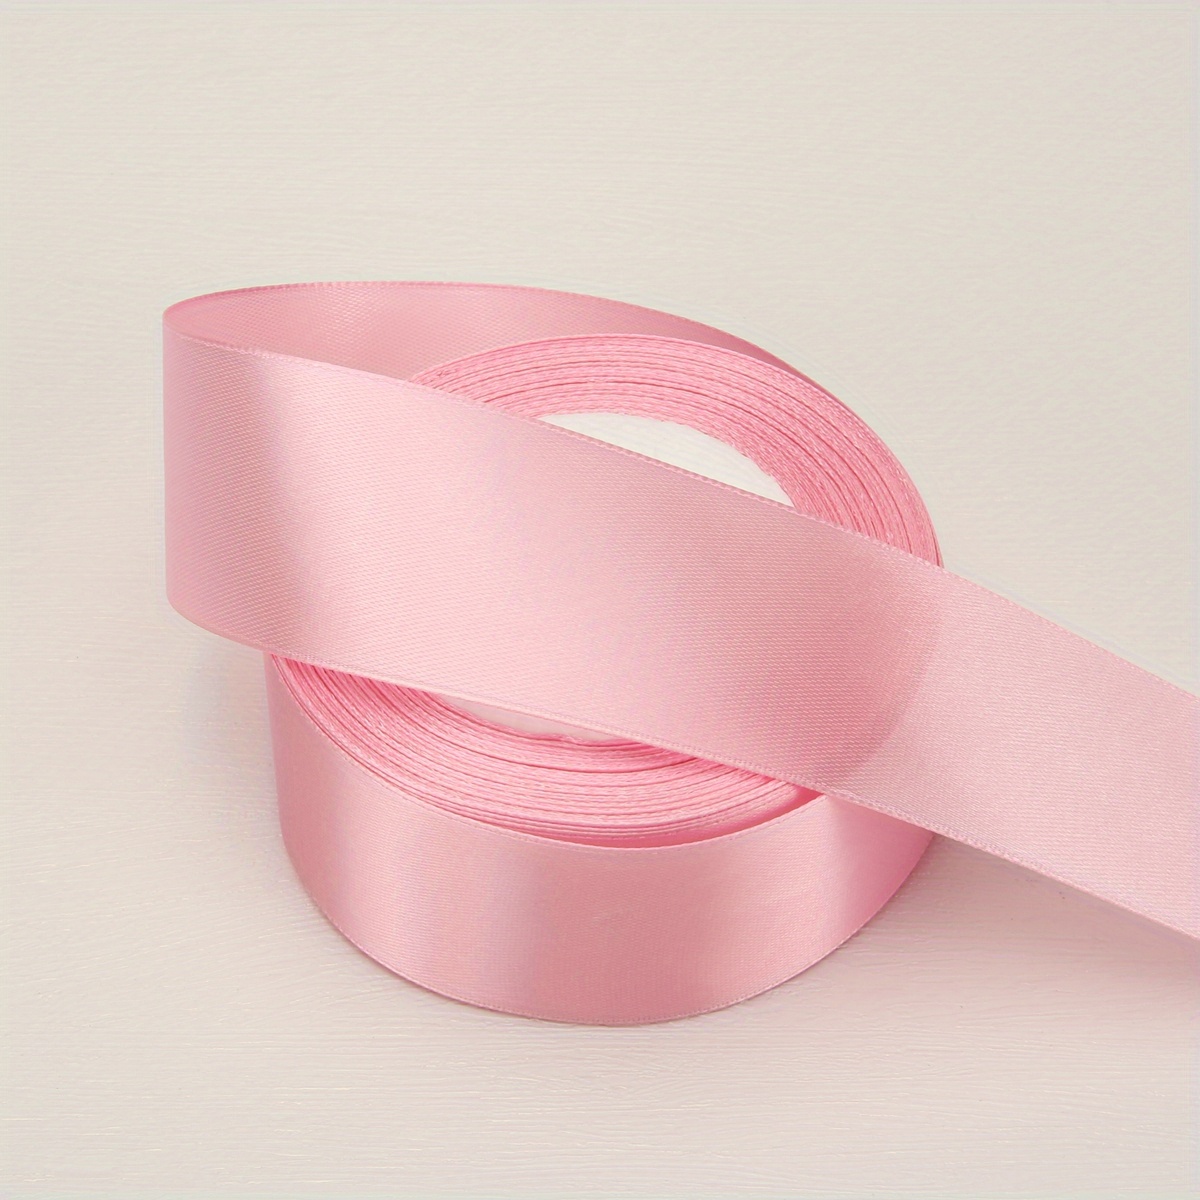 Swedin 2 Rolls (1aa50 Yards, 12aa50 Yards) Pink Satin Ribbon for Gift Wrapping, Wedding, Bow Making Other Projects